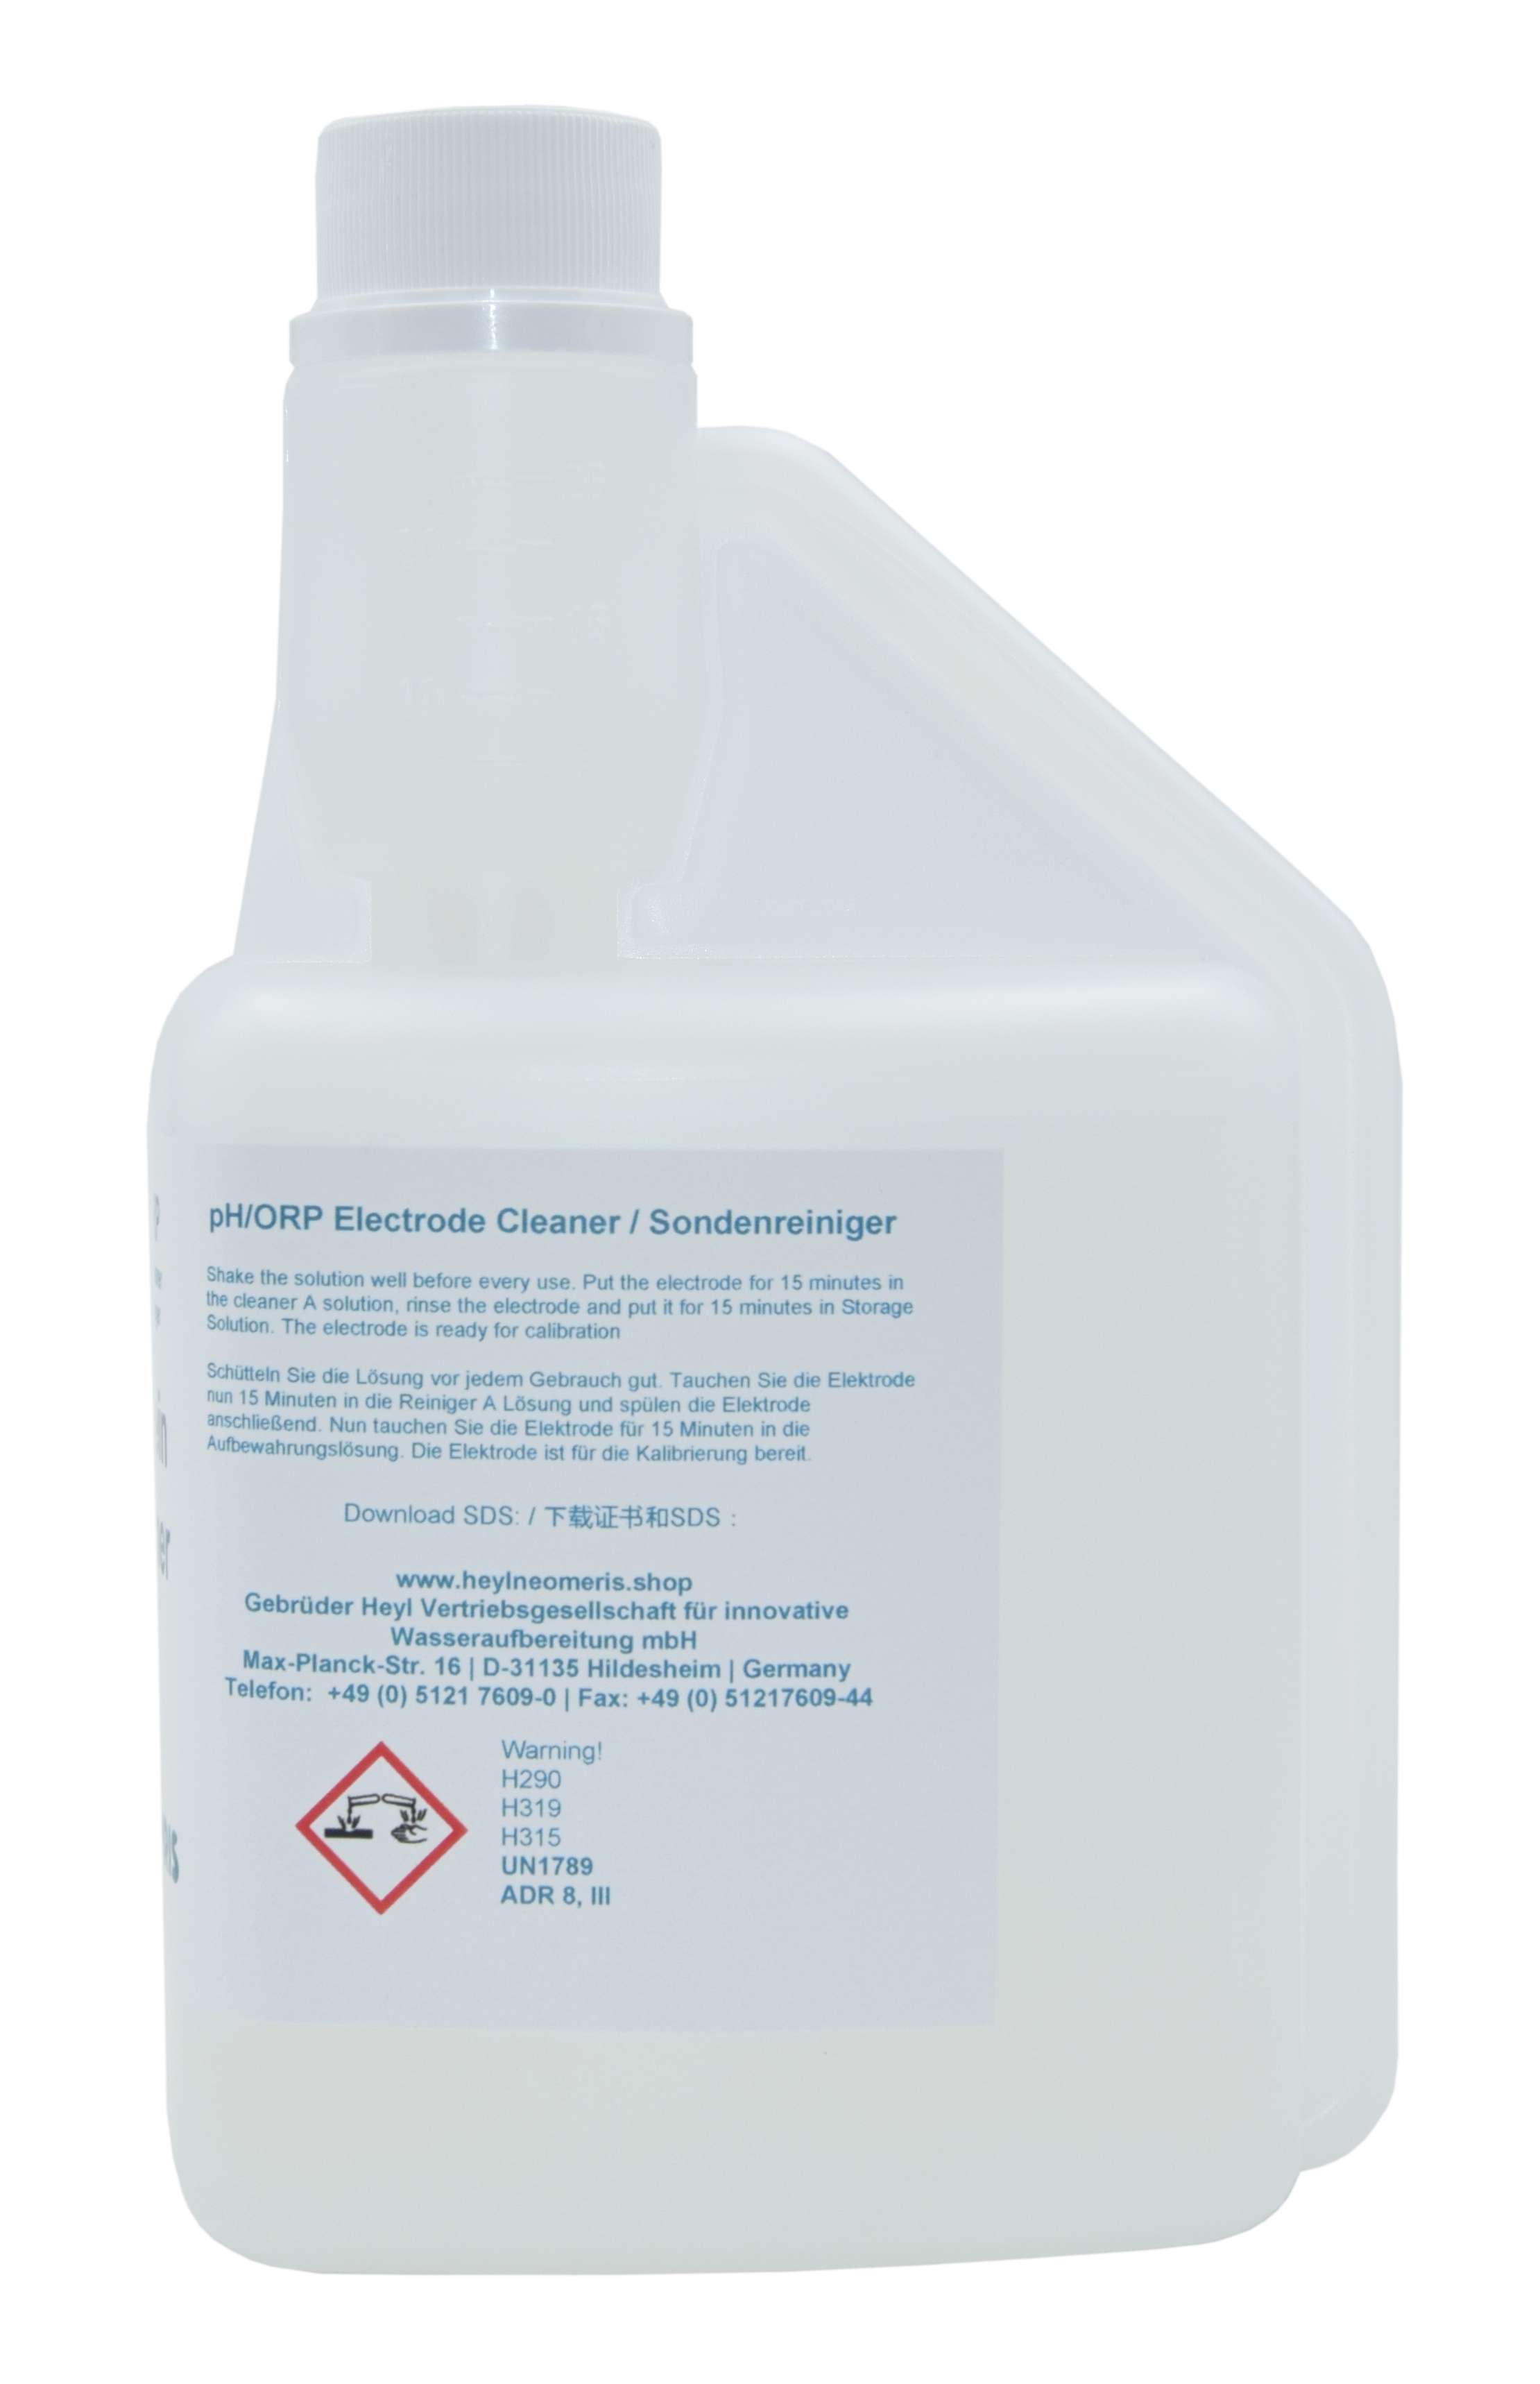 Cleaning solution for pH and redox electrodes (Pepsin) - probe cleaner